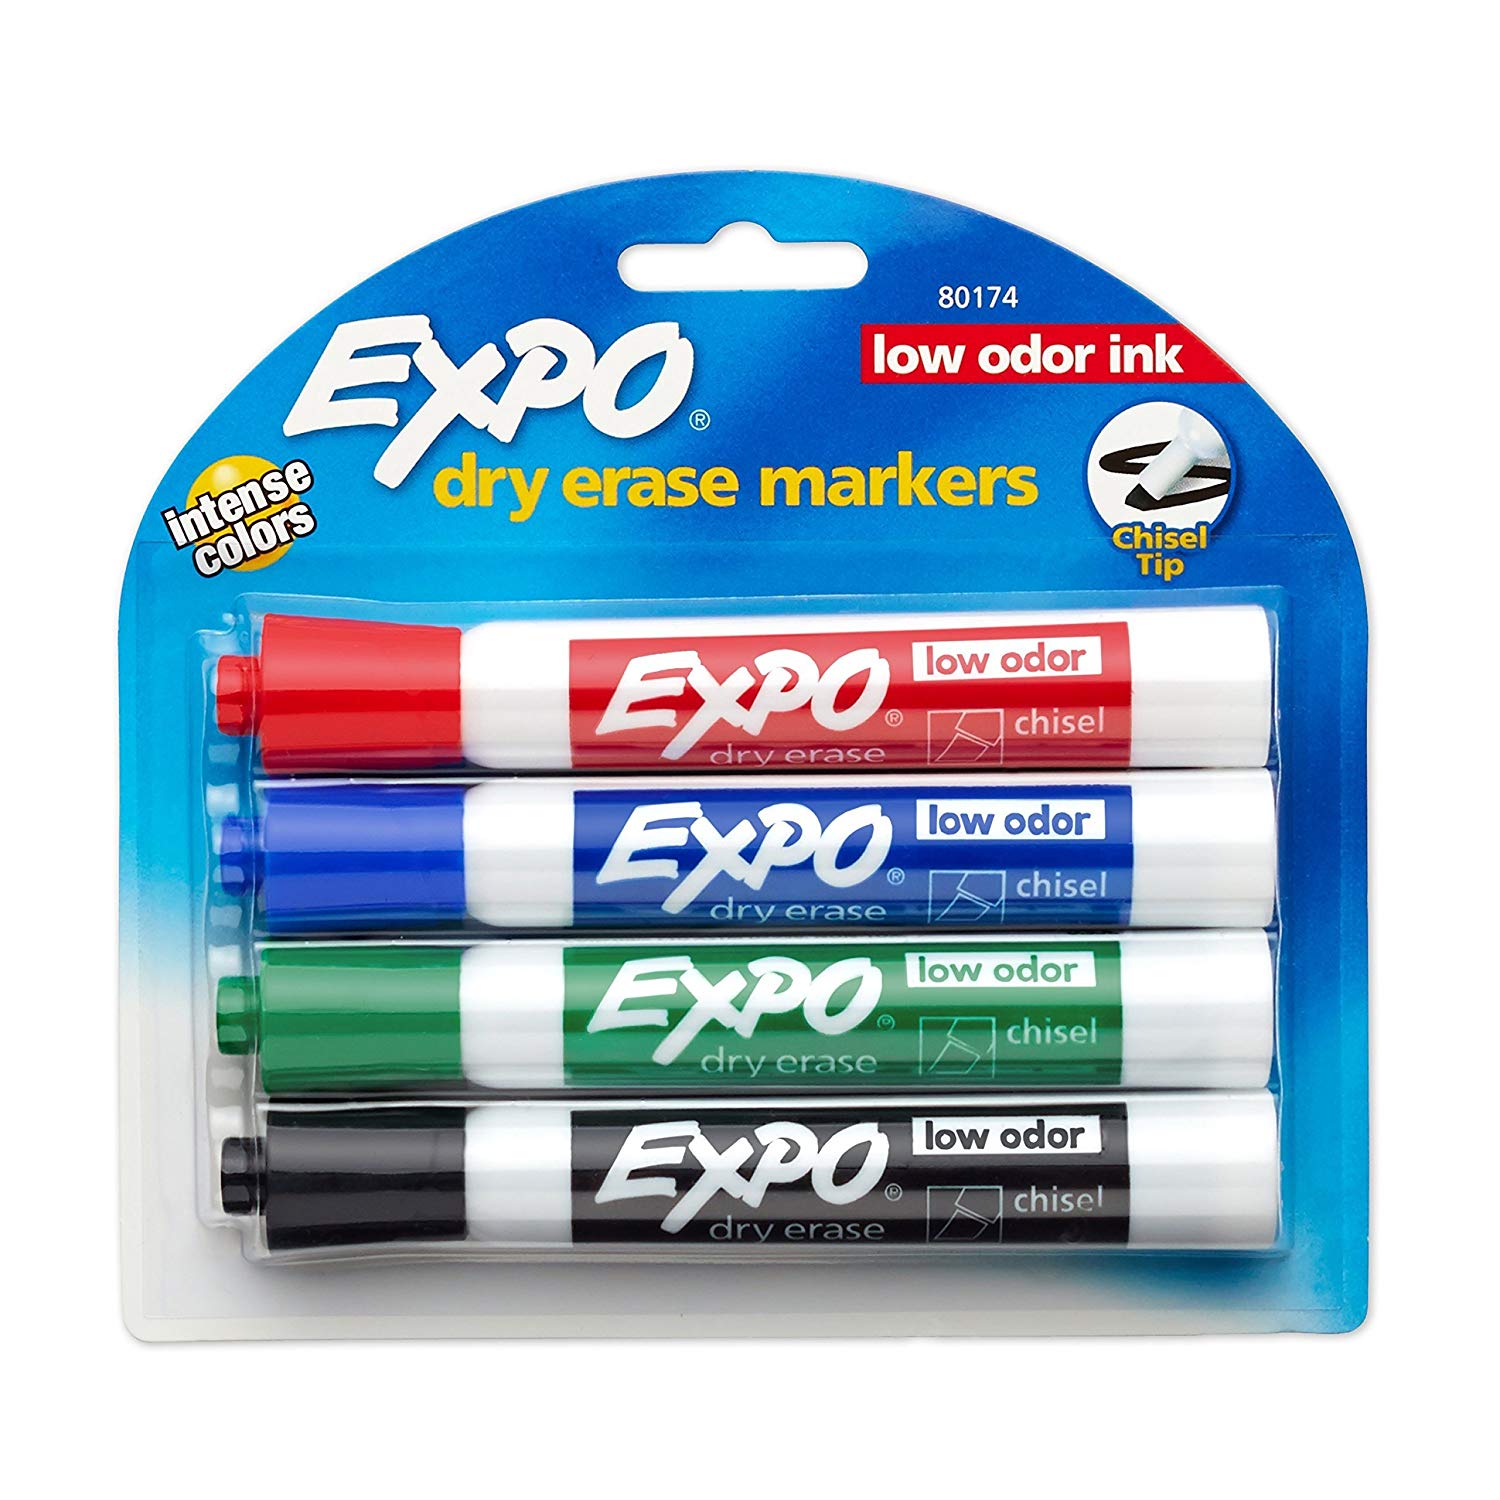 Expo Dry Erase Markers, 4 Pack, Low Odor Ink, Black, Red, Blue, Green (80174)